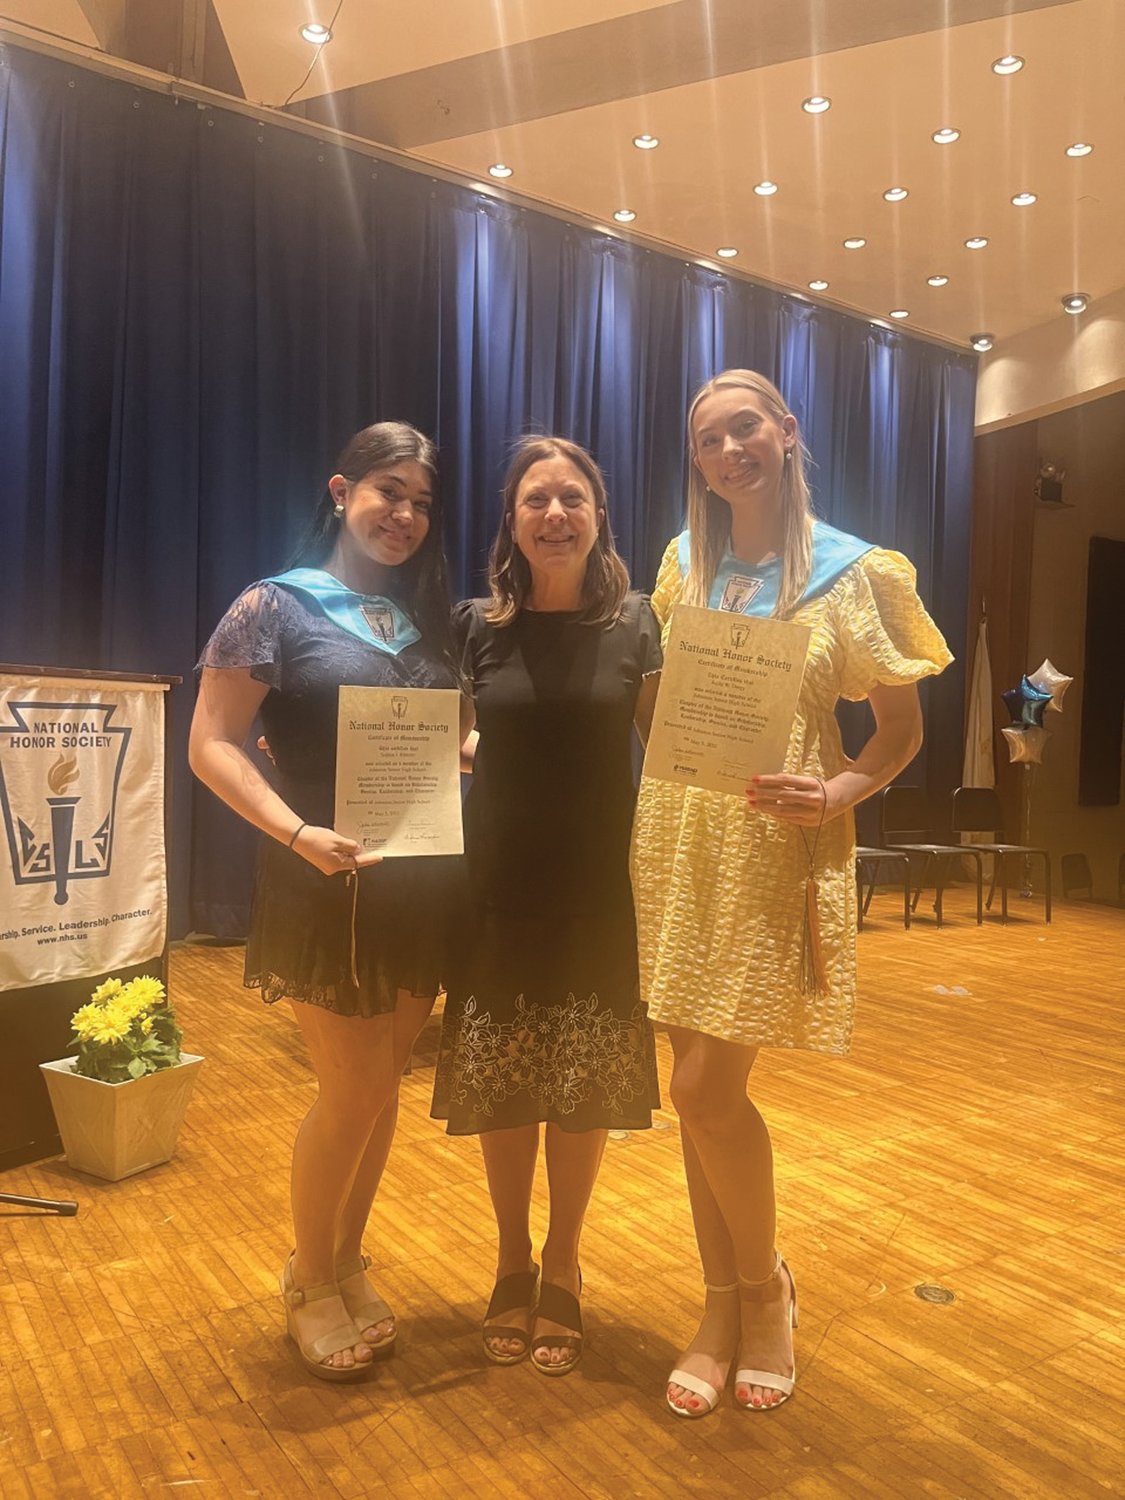 Sophia Ribezzo, Emilia Ruggiero and Kelly Dargy, pose for a photo at this year’s National Honor Society ceremony at Johnston High School.